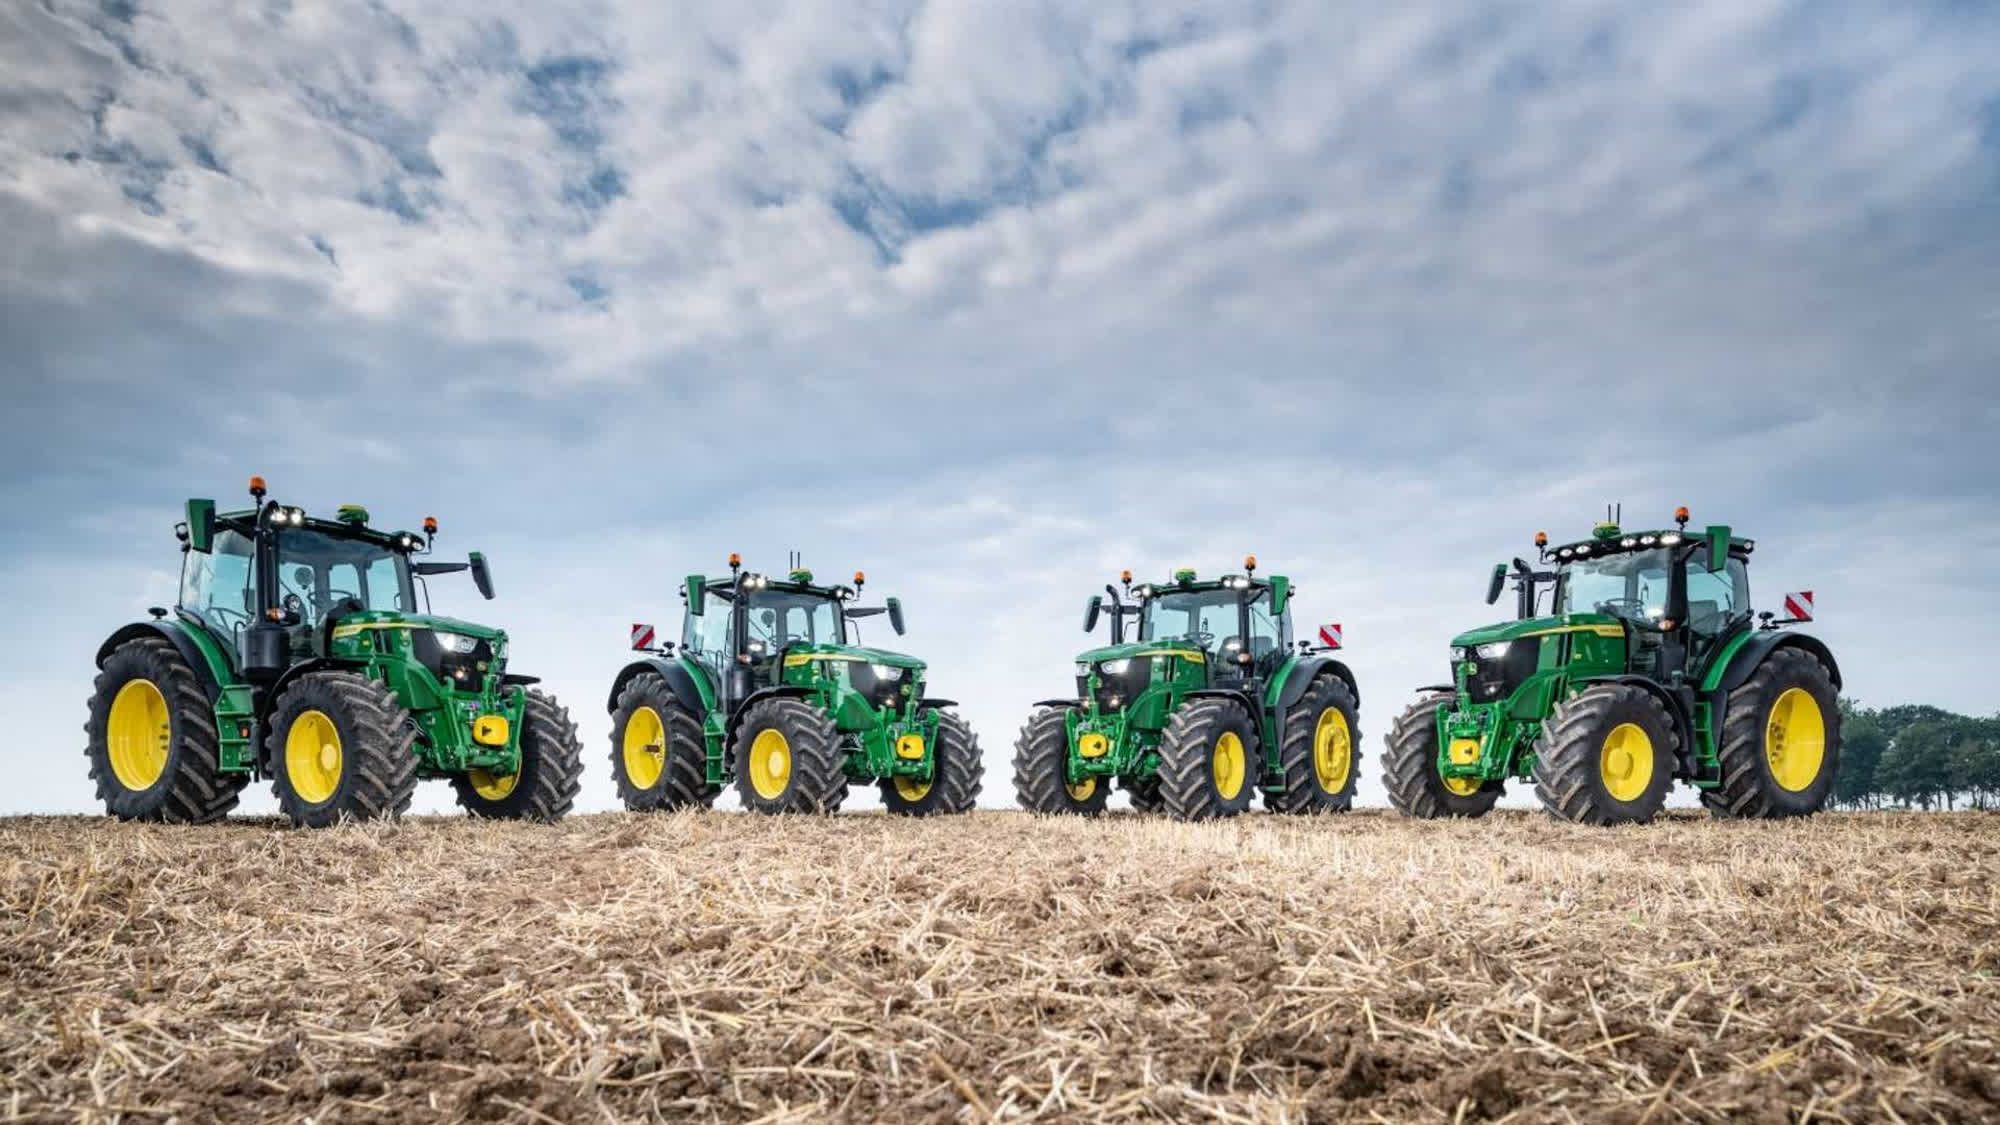 John Deere provides some right-to-repair concessions to customers